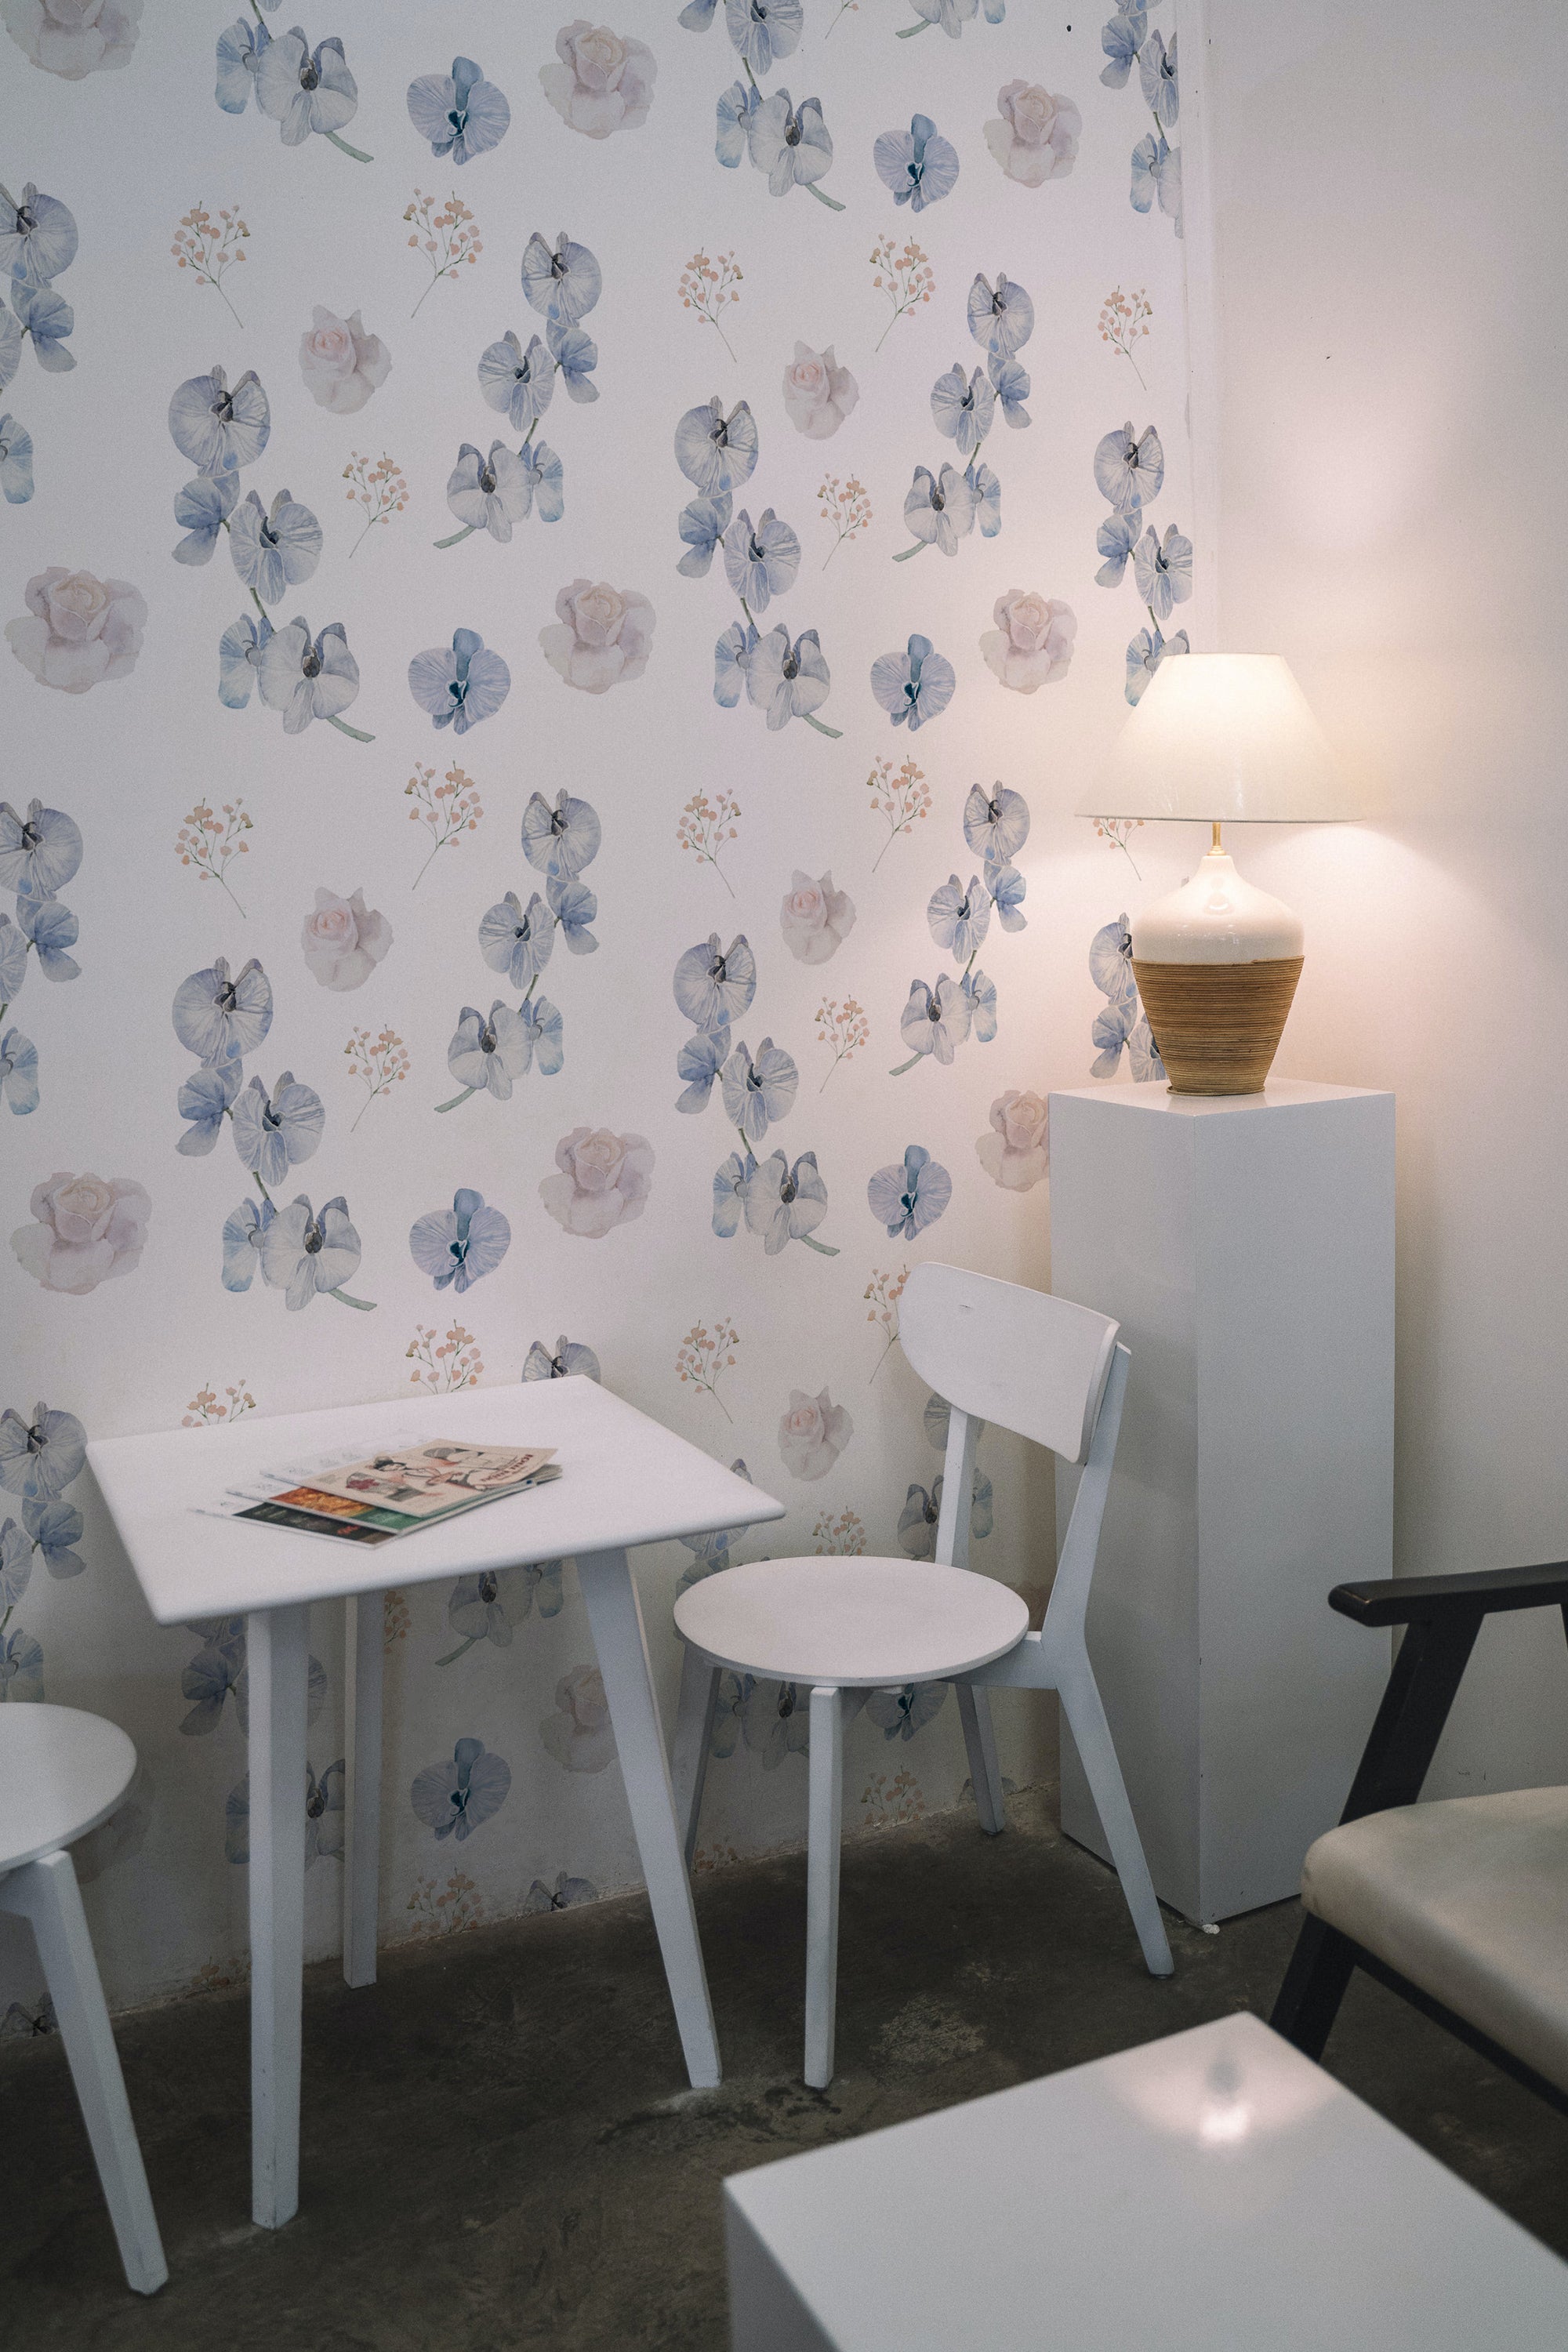 A small dining area with a white table and chairs against a wall covered in dreamy orchid wallpaper. The wallpaper showcases a delicate pattern of blue orchids, soft pink roses, and small sprigs of baby's breath on a light background, creating a calming and inviting atmosphere. A table lamp on a white pedestal adds a warm glow to the space.